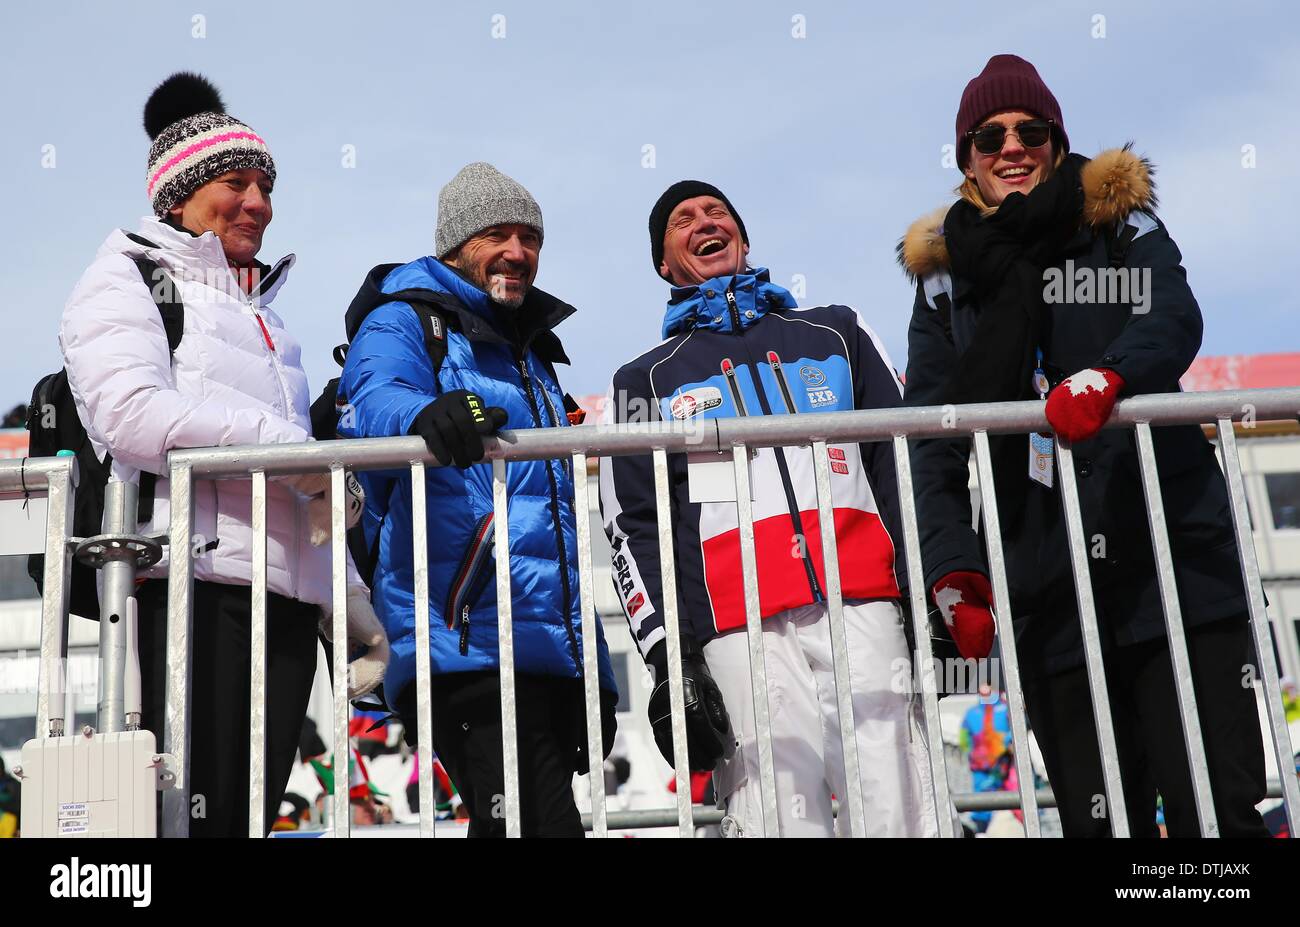 Krasnaya Polyana, Russia. 19th Feb, 2014. (L-R) Former alpine skier and parents of Felix Neureuther from Germany, Rosi Mittermaier and Christian Neureuther, Former alpine skier Markus Wasmeier of Germany and Felix Neureuther's sister Amelie seen in the stands during the Men's Giant Slalom Alpine Skiing event in Rosa Khutor Alpine Center at the Sochi 2014 Olympic Games, Krasnaya Polyana, Russia, 19 February 2014. Photo: Michael Kappeler/dpa/Alamy Live News  Stock Photo